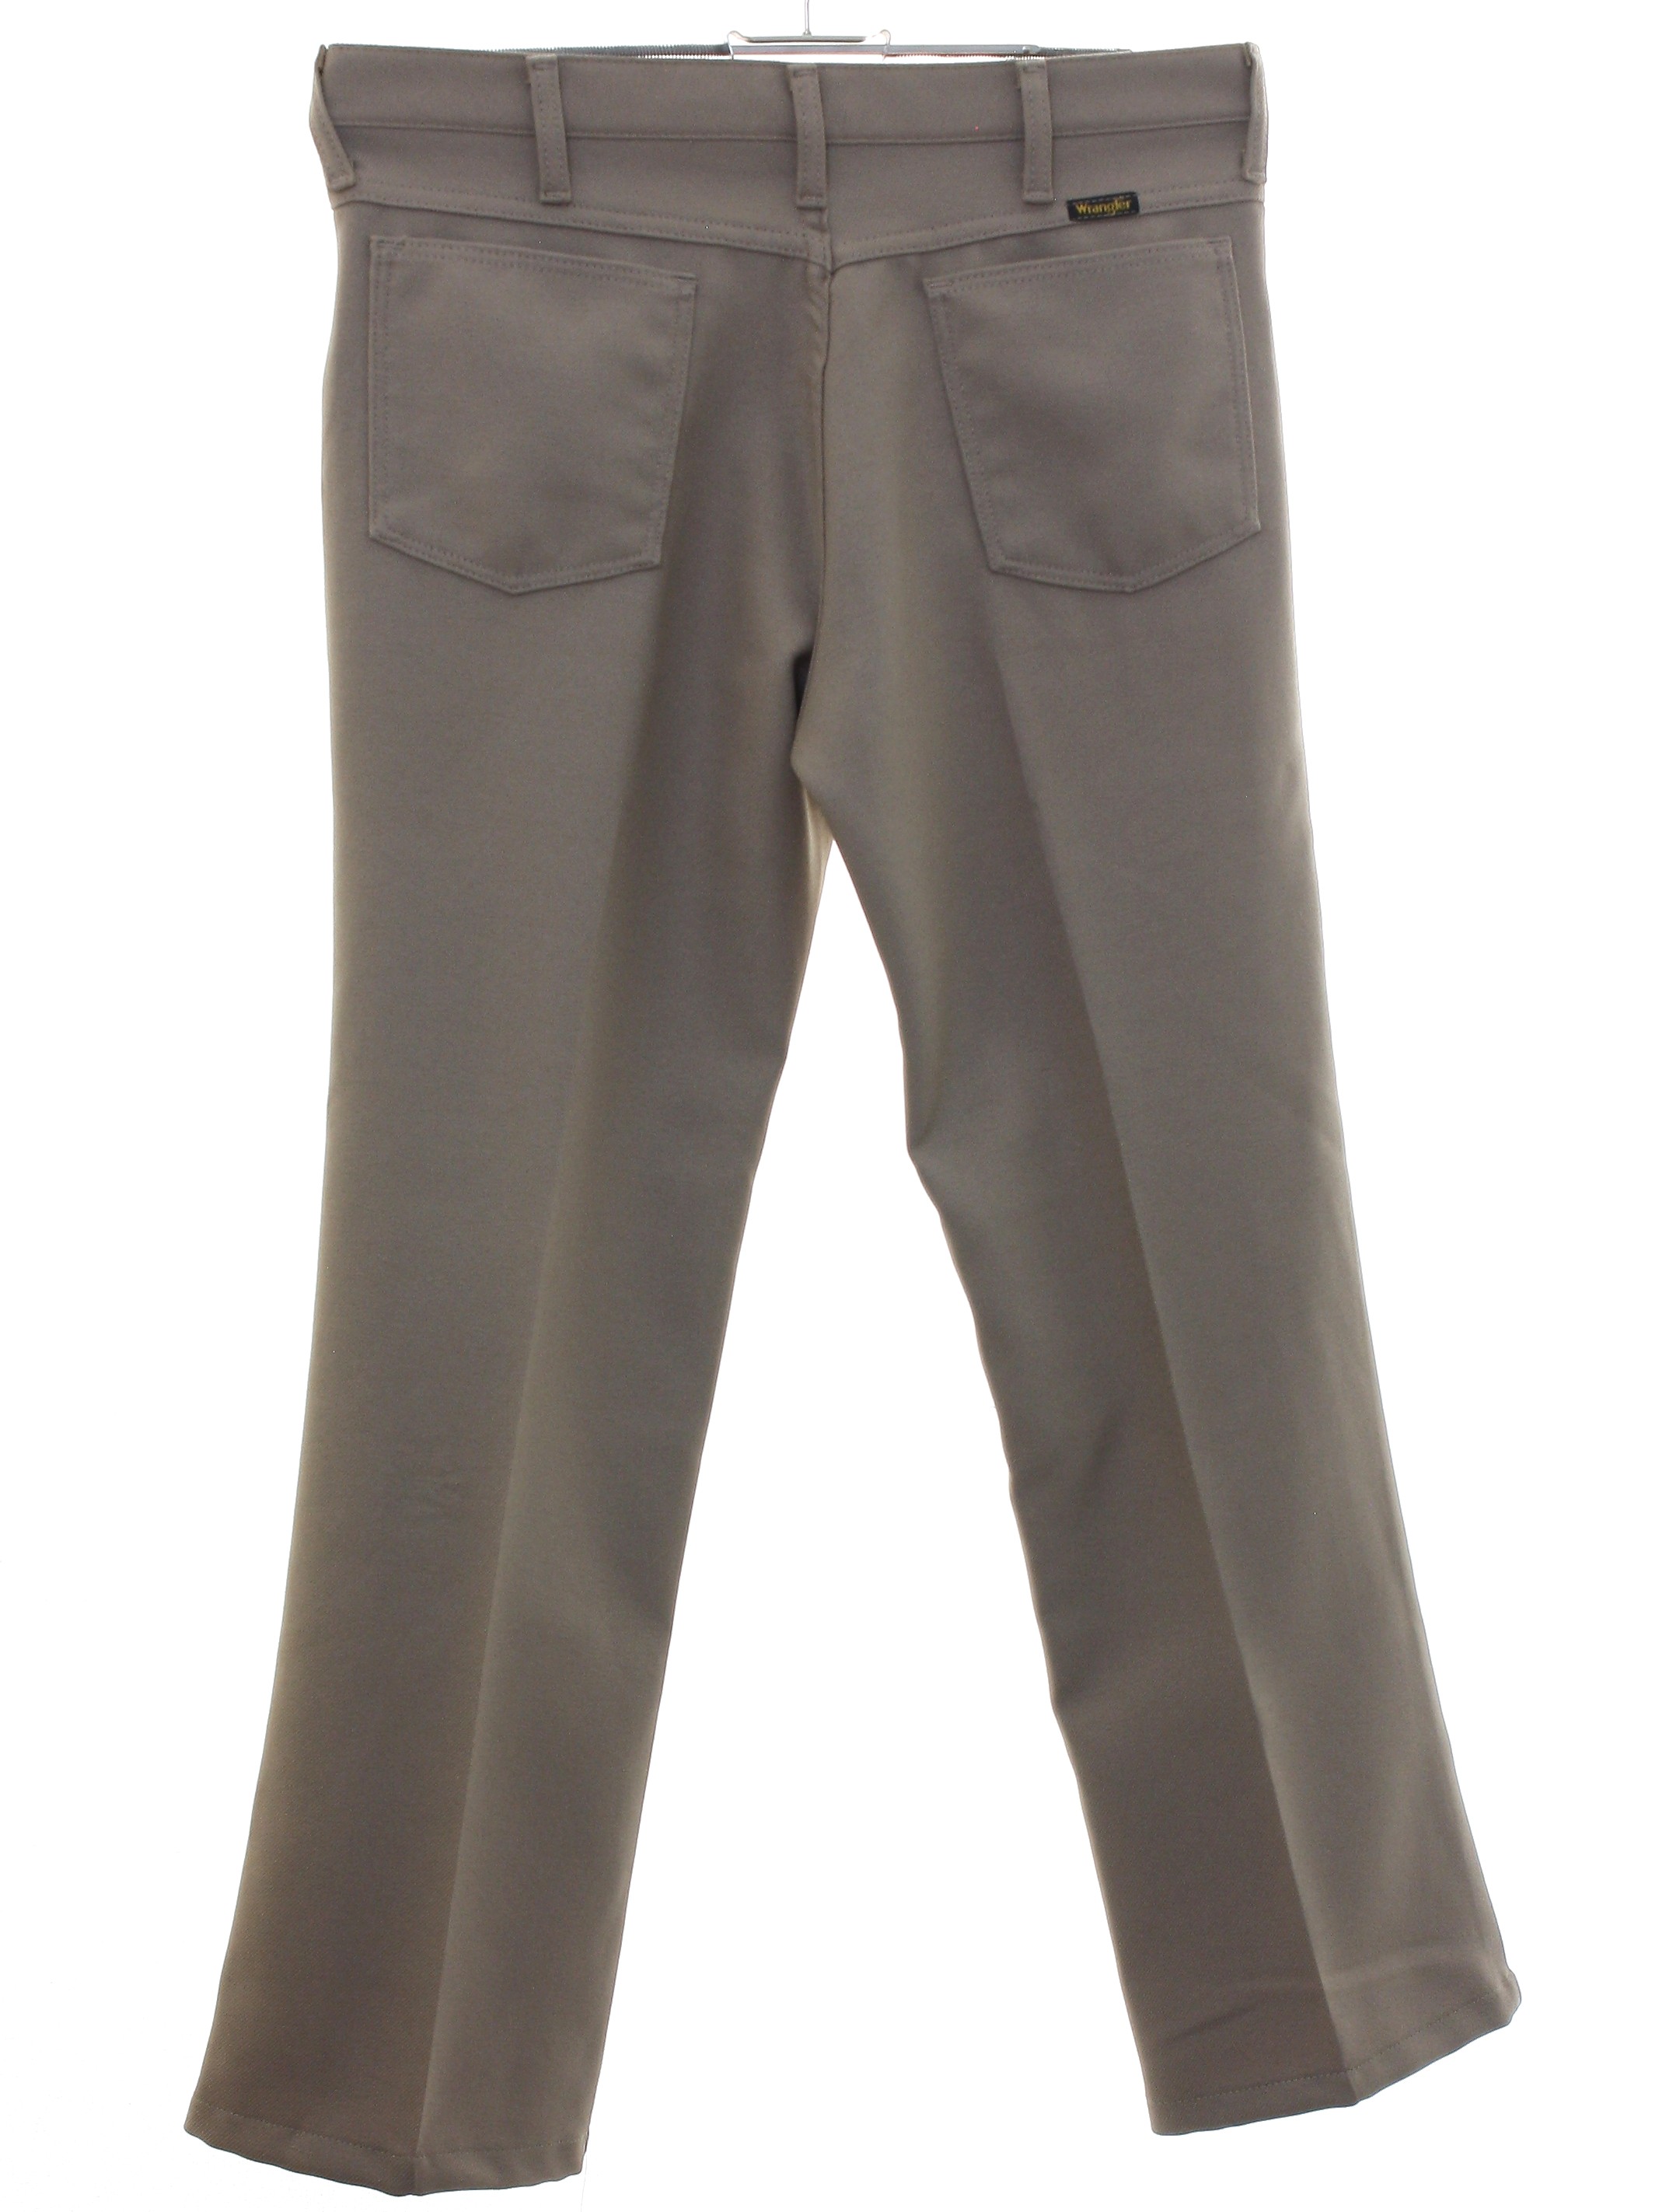 1970's Pants (Wrangler): 70s -Wrangler- Mens tan solid colored polyester  flat front jeans-cut pants with cuffless hem, front scoop pockets, two rear  patch pockets, button and zippered front closure, 2 1/2 inch